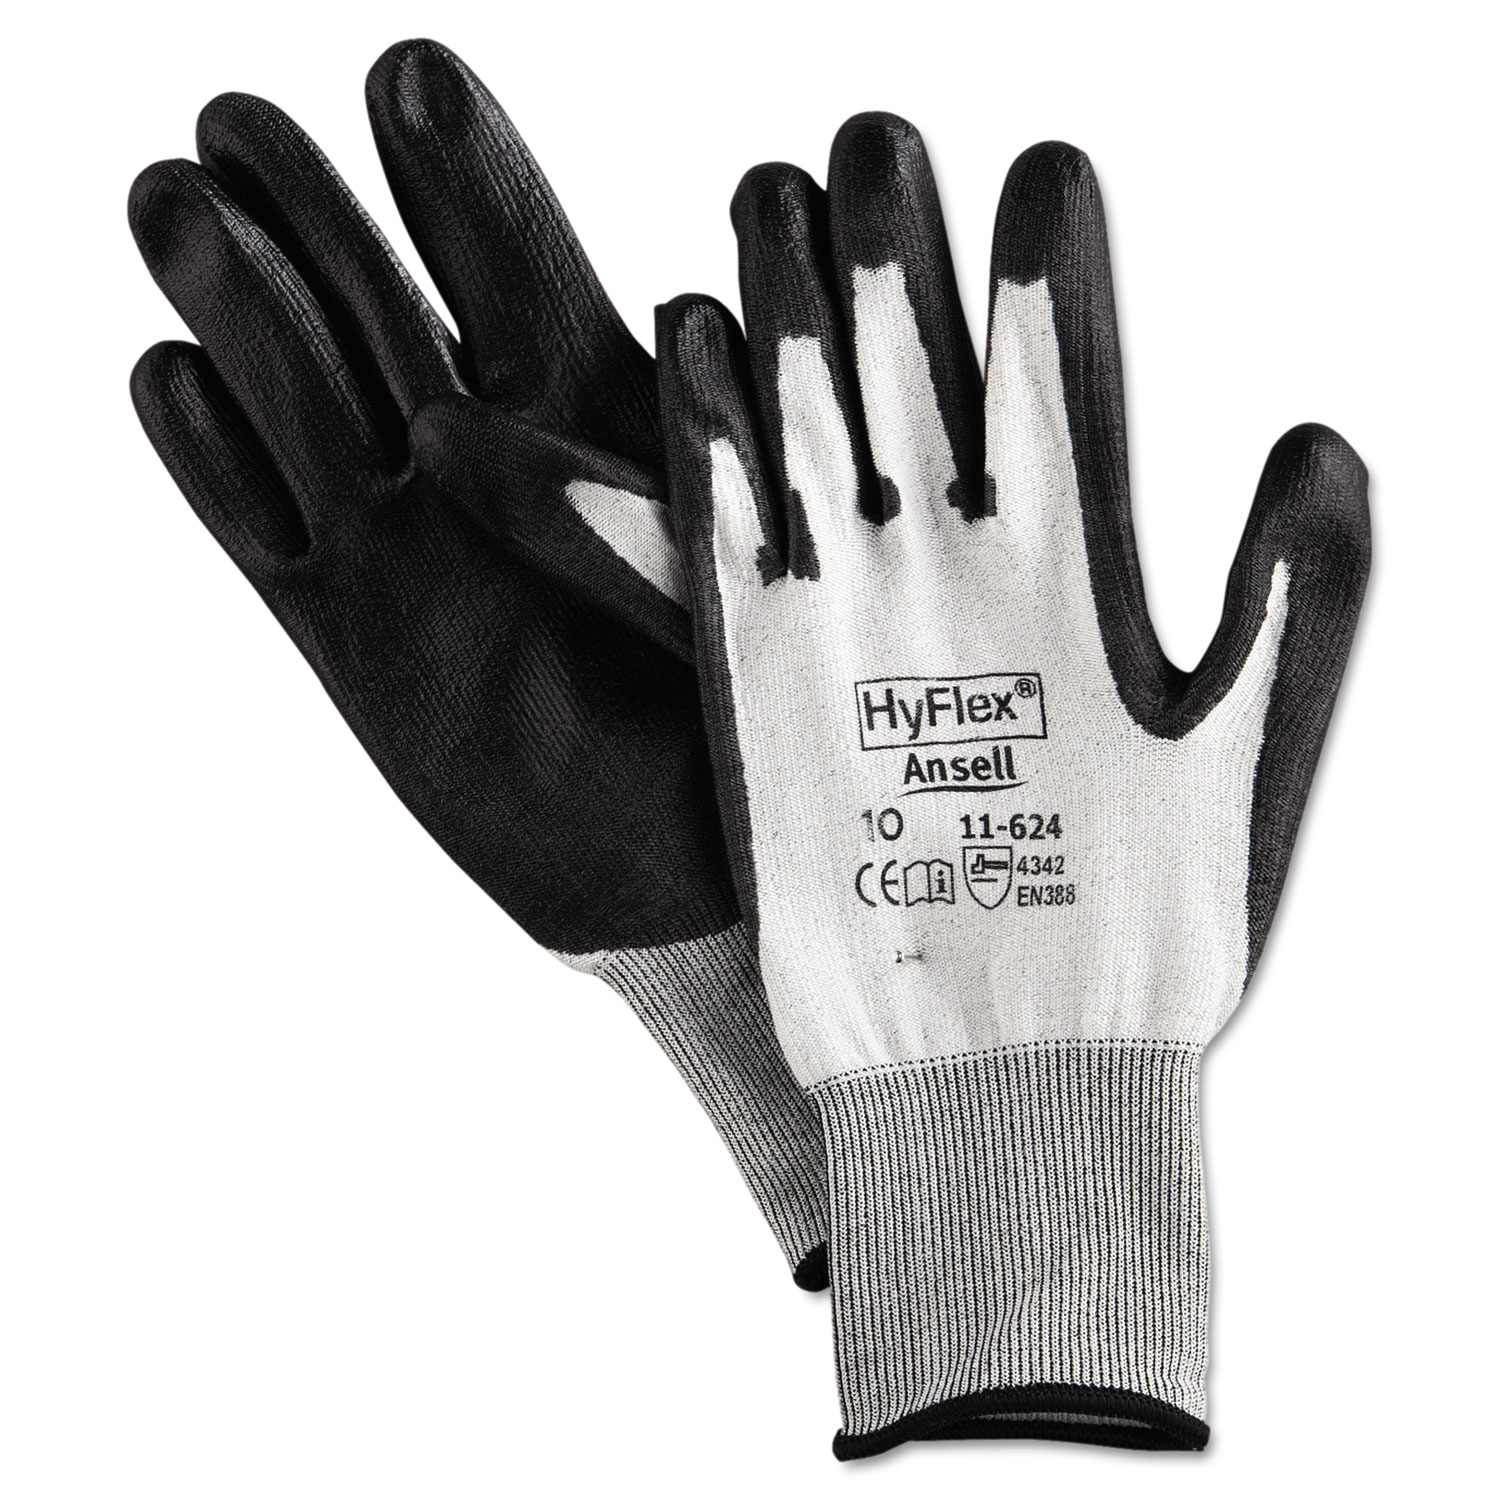  AnsellPro 104781 HyFlex Dyneema Cut-Protection Gloves, Gray, Size 10, 12 Pairs (ANS1162410) 